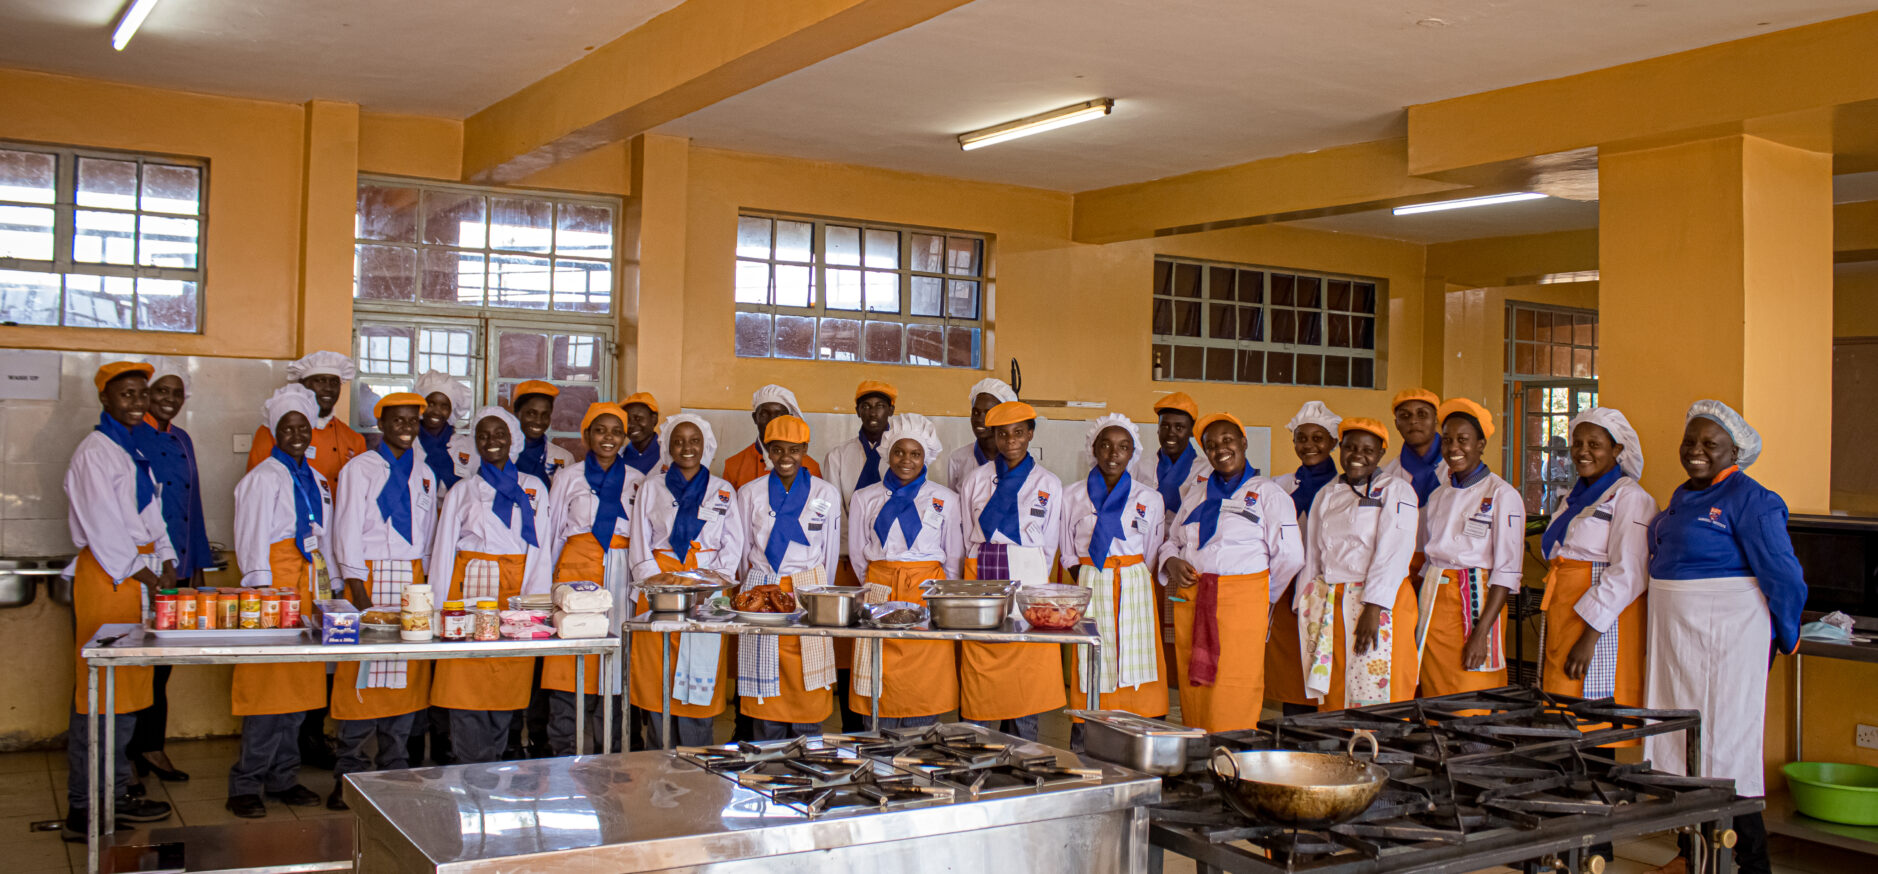 Amboseli Institute of Hospitality & Technology, accredited by the Kenyan Ministry of Education